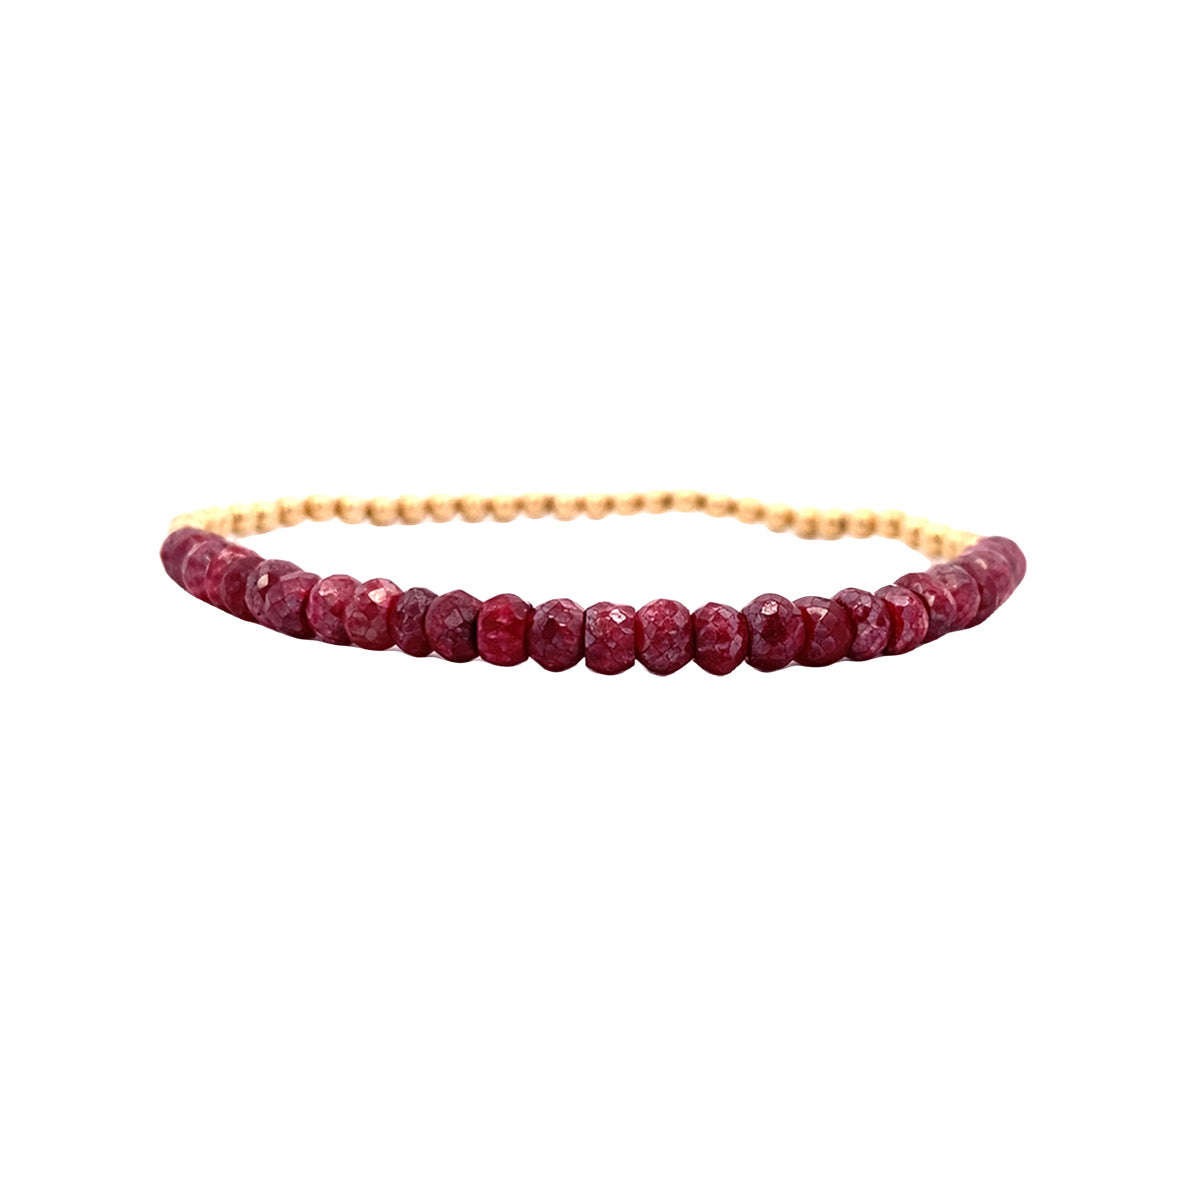 Karen Lazar Stretch 3mm Yellow Gold Filled and Ruby Bracelet Size 6.25